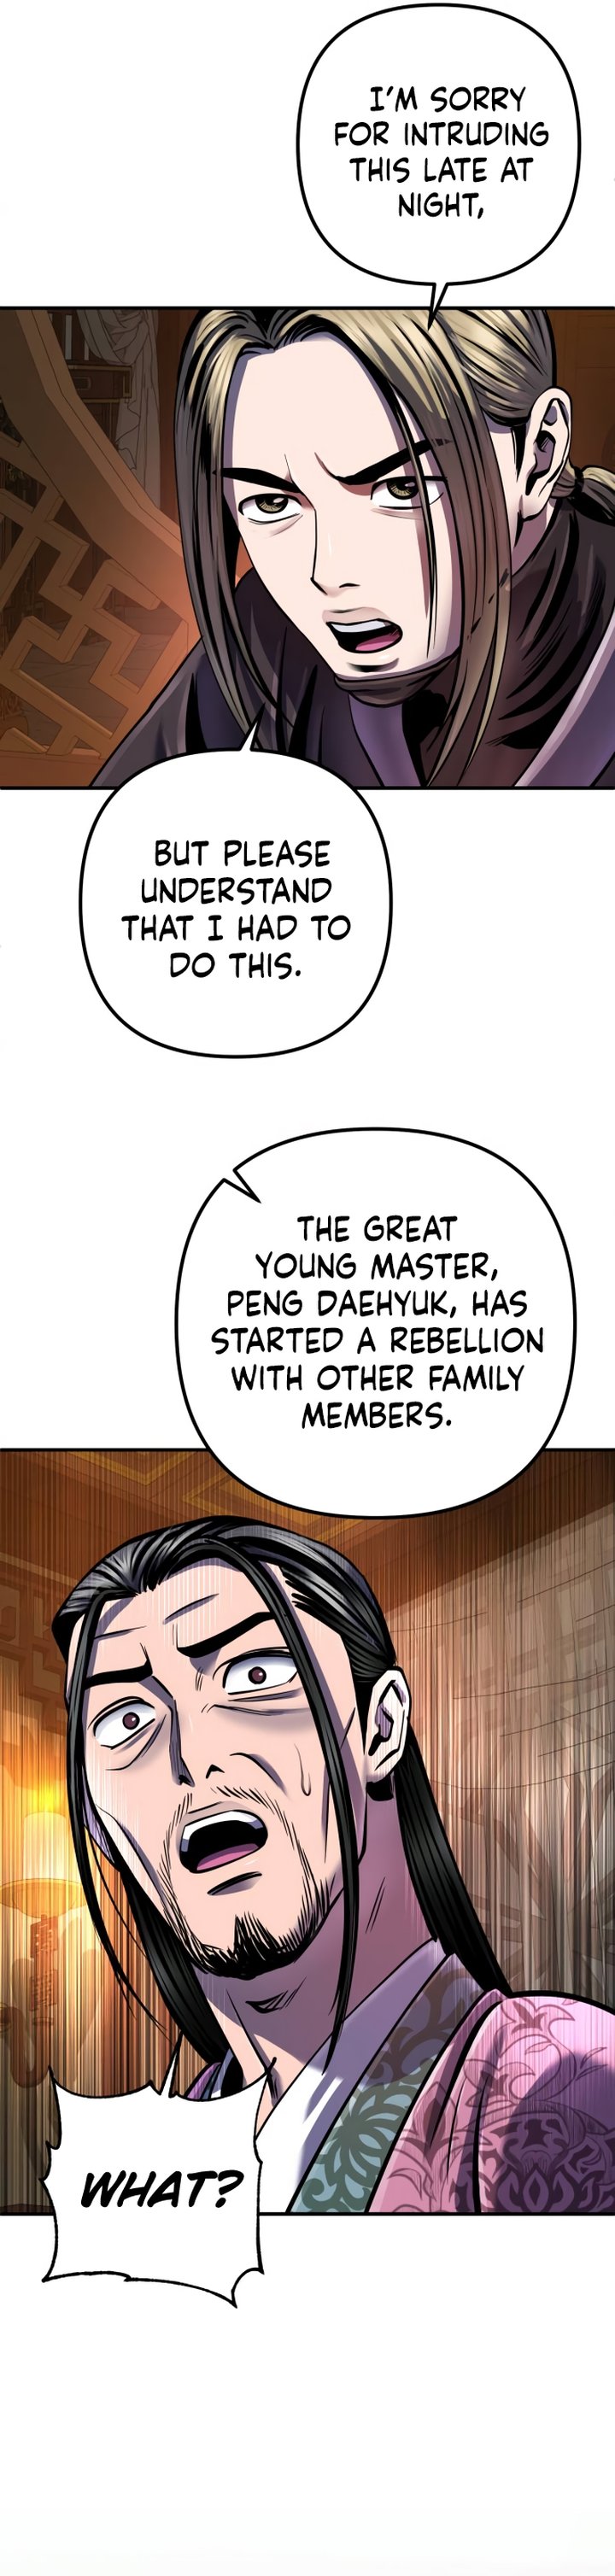 Revenge Of Young Master Peng 50 10